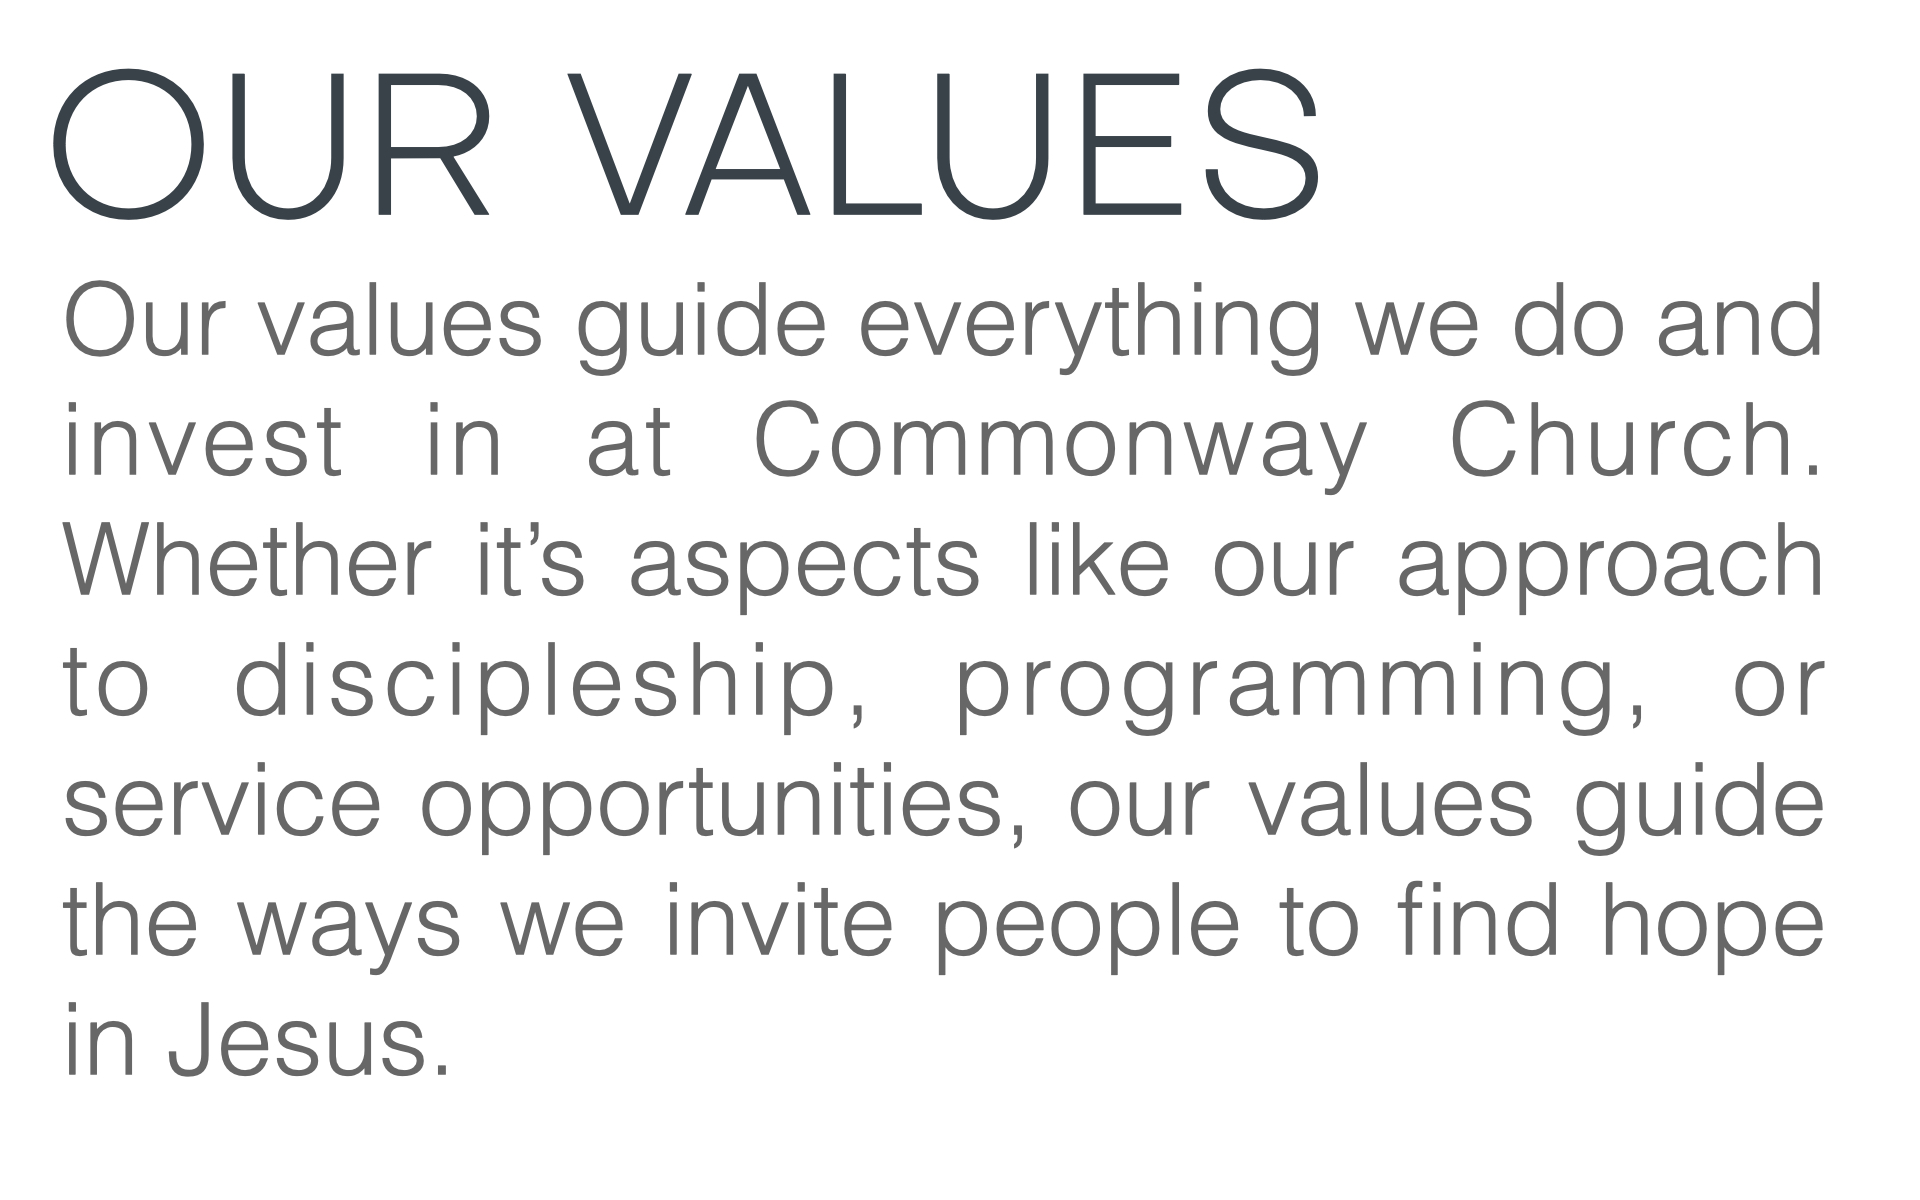 OUR VALUES Our values guide everything we do and invest in at Commonway Church. Whether it’s aspects like our approach to discipleship, programming, or service opportunities, our values guide the ways we invite people to find hope in Jesus.